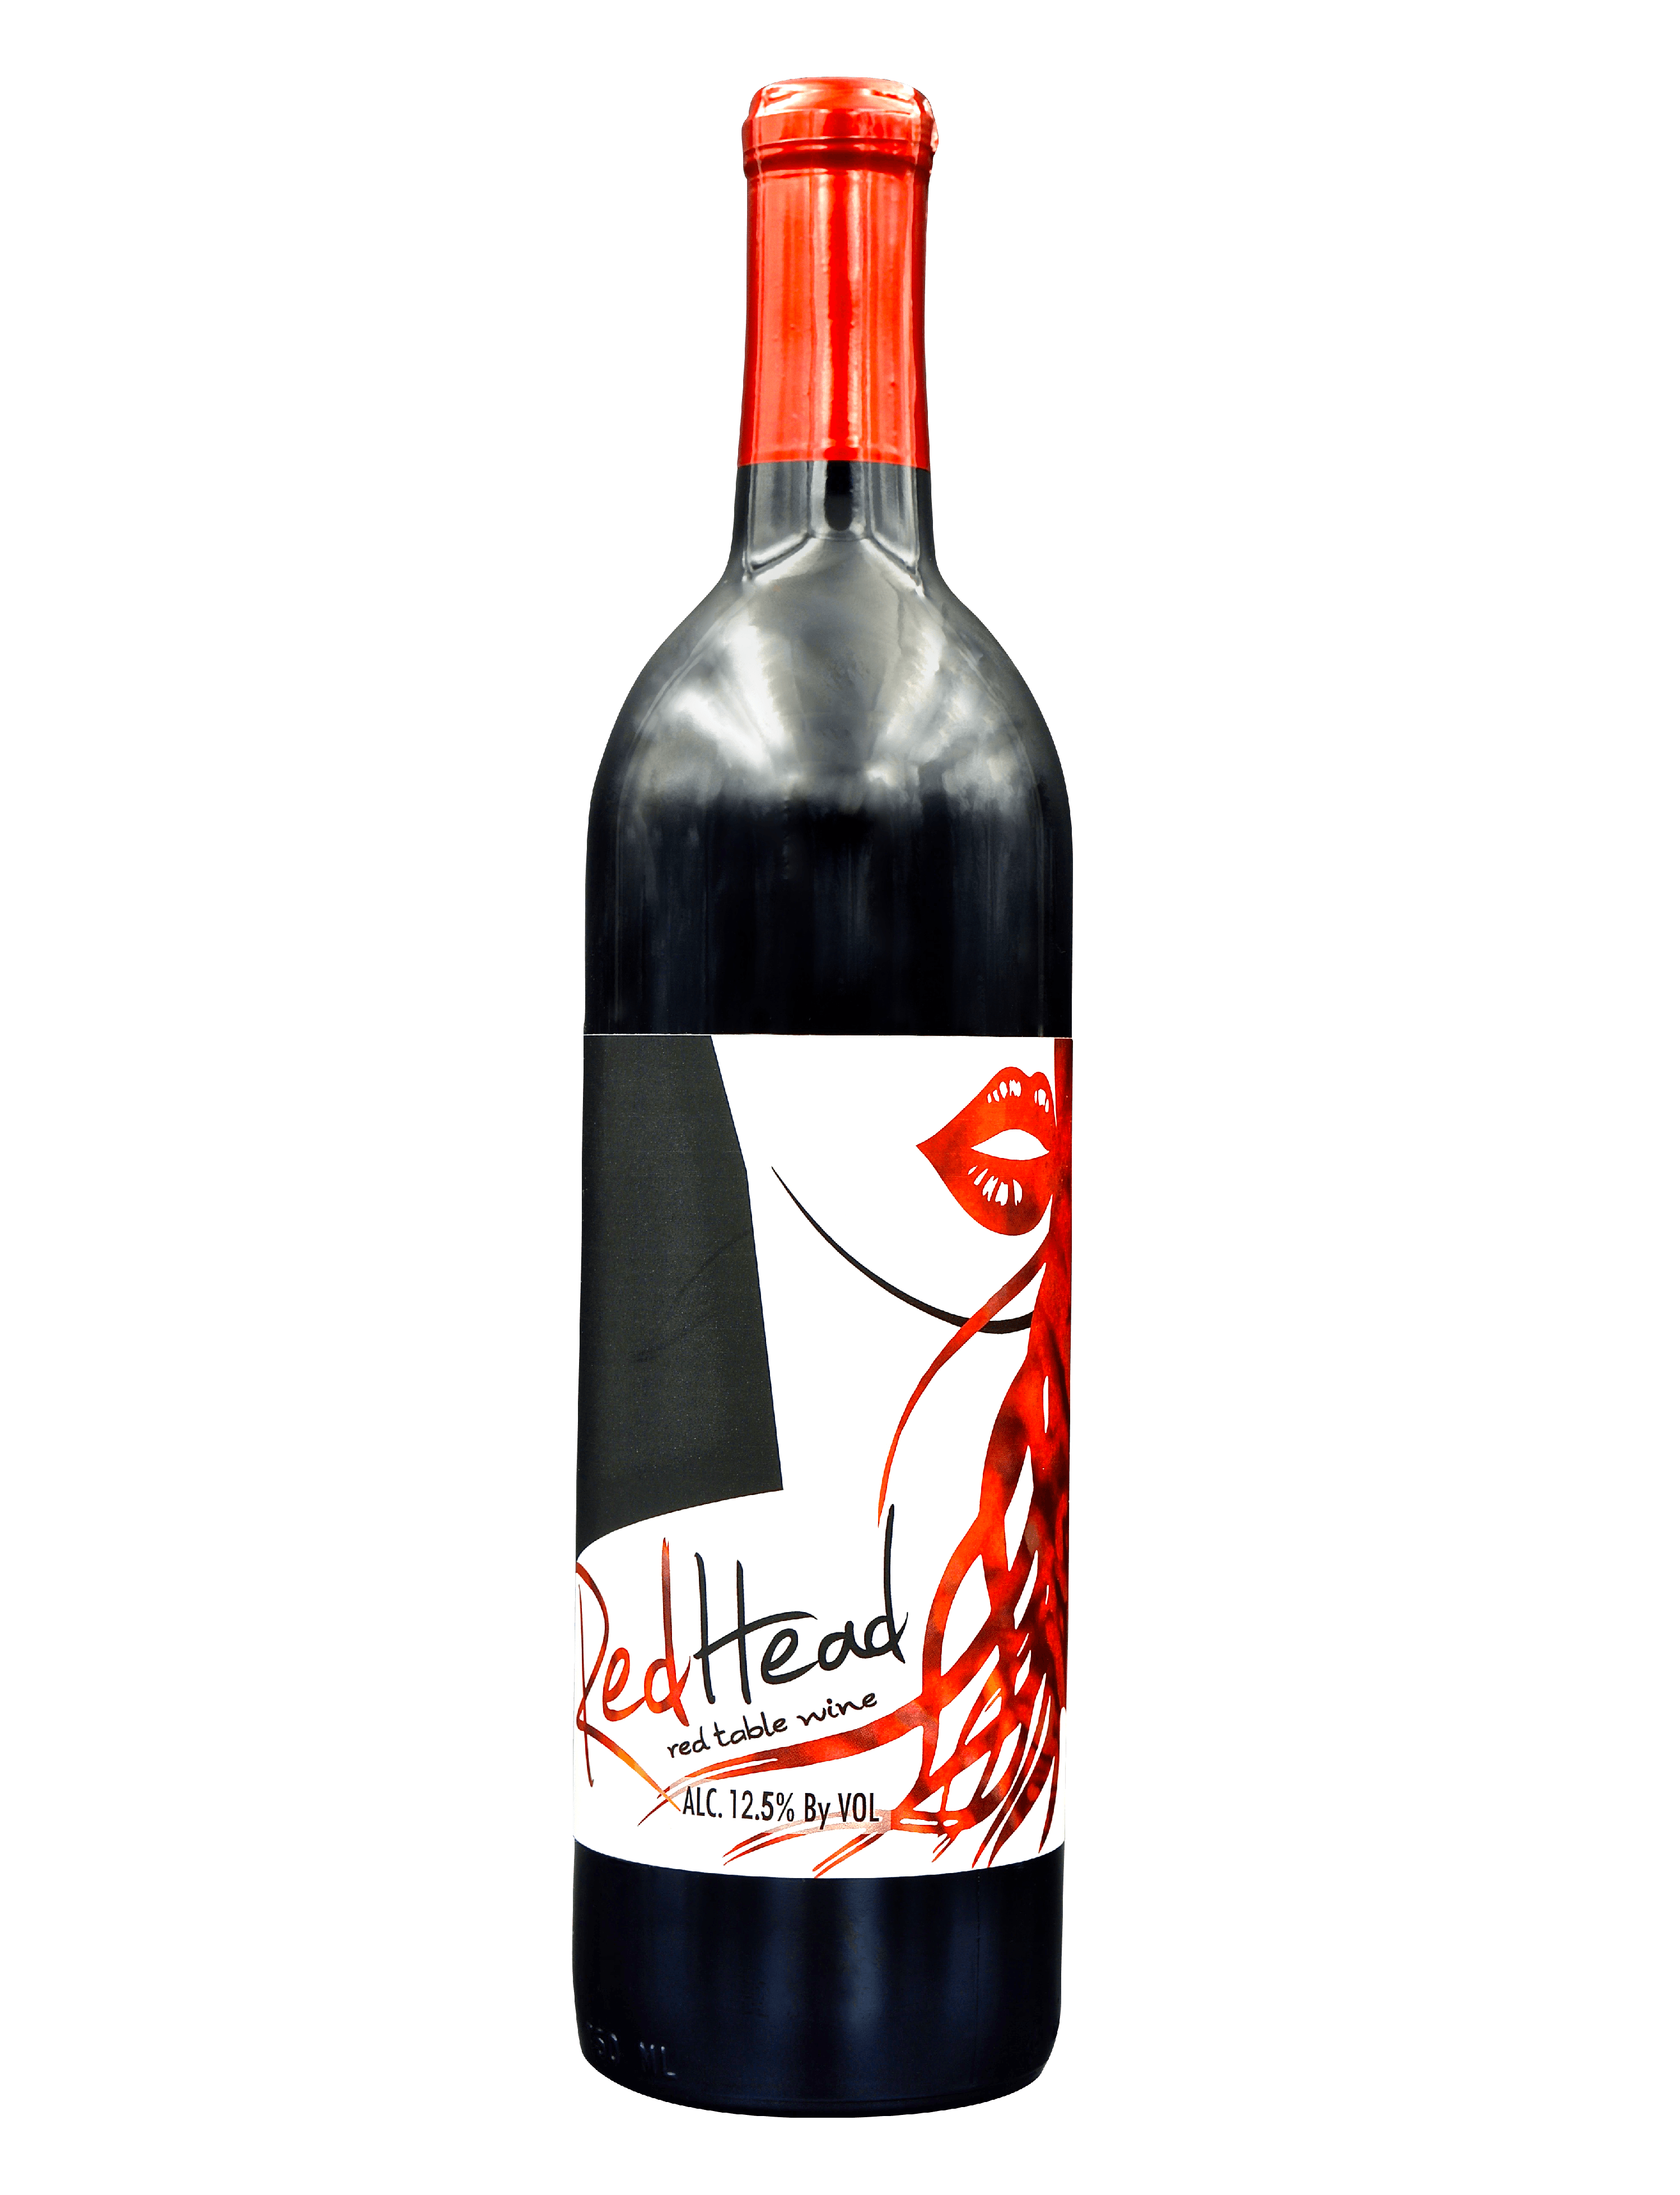 images/wine/Red Wine/RedHead Red Blend.png